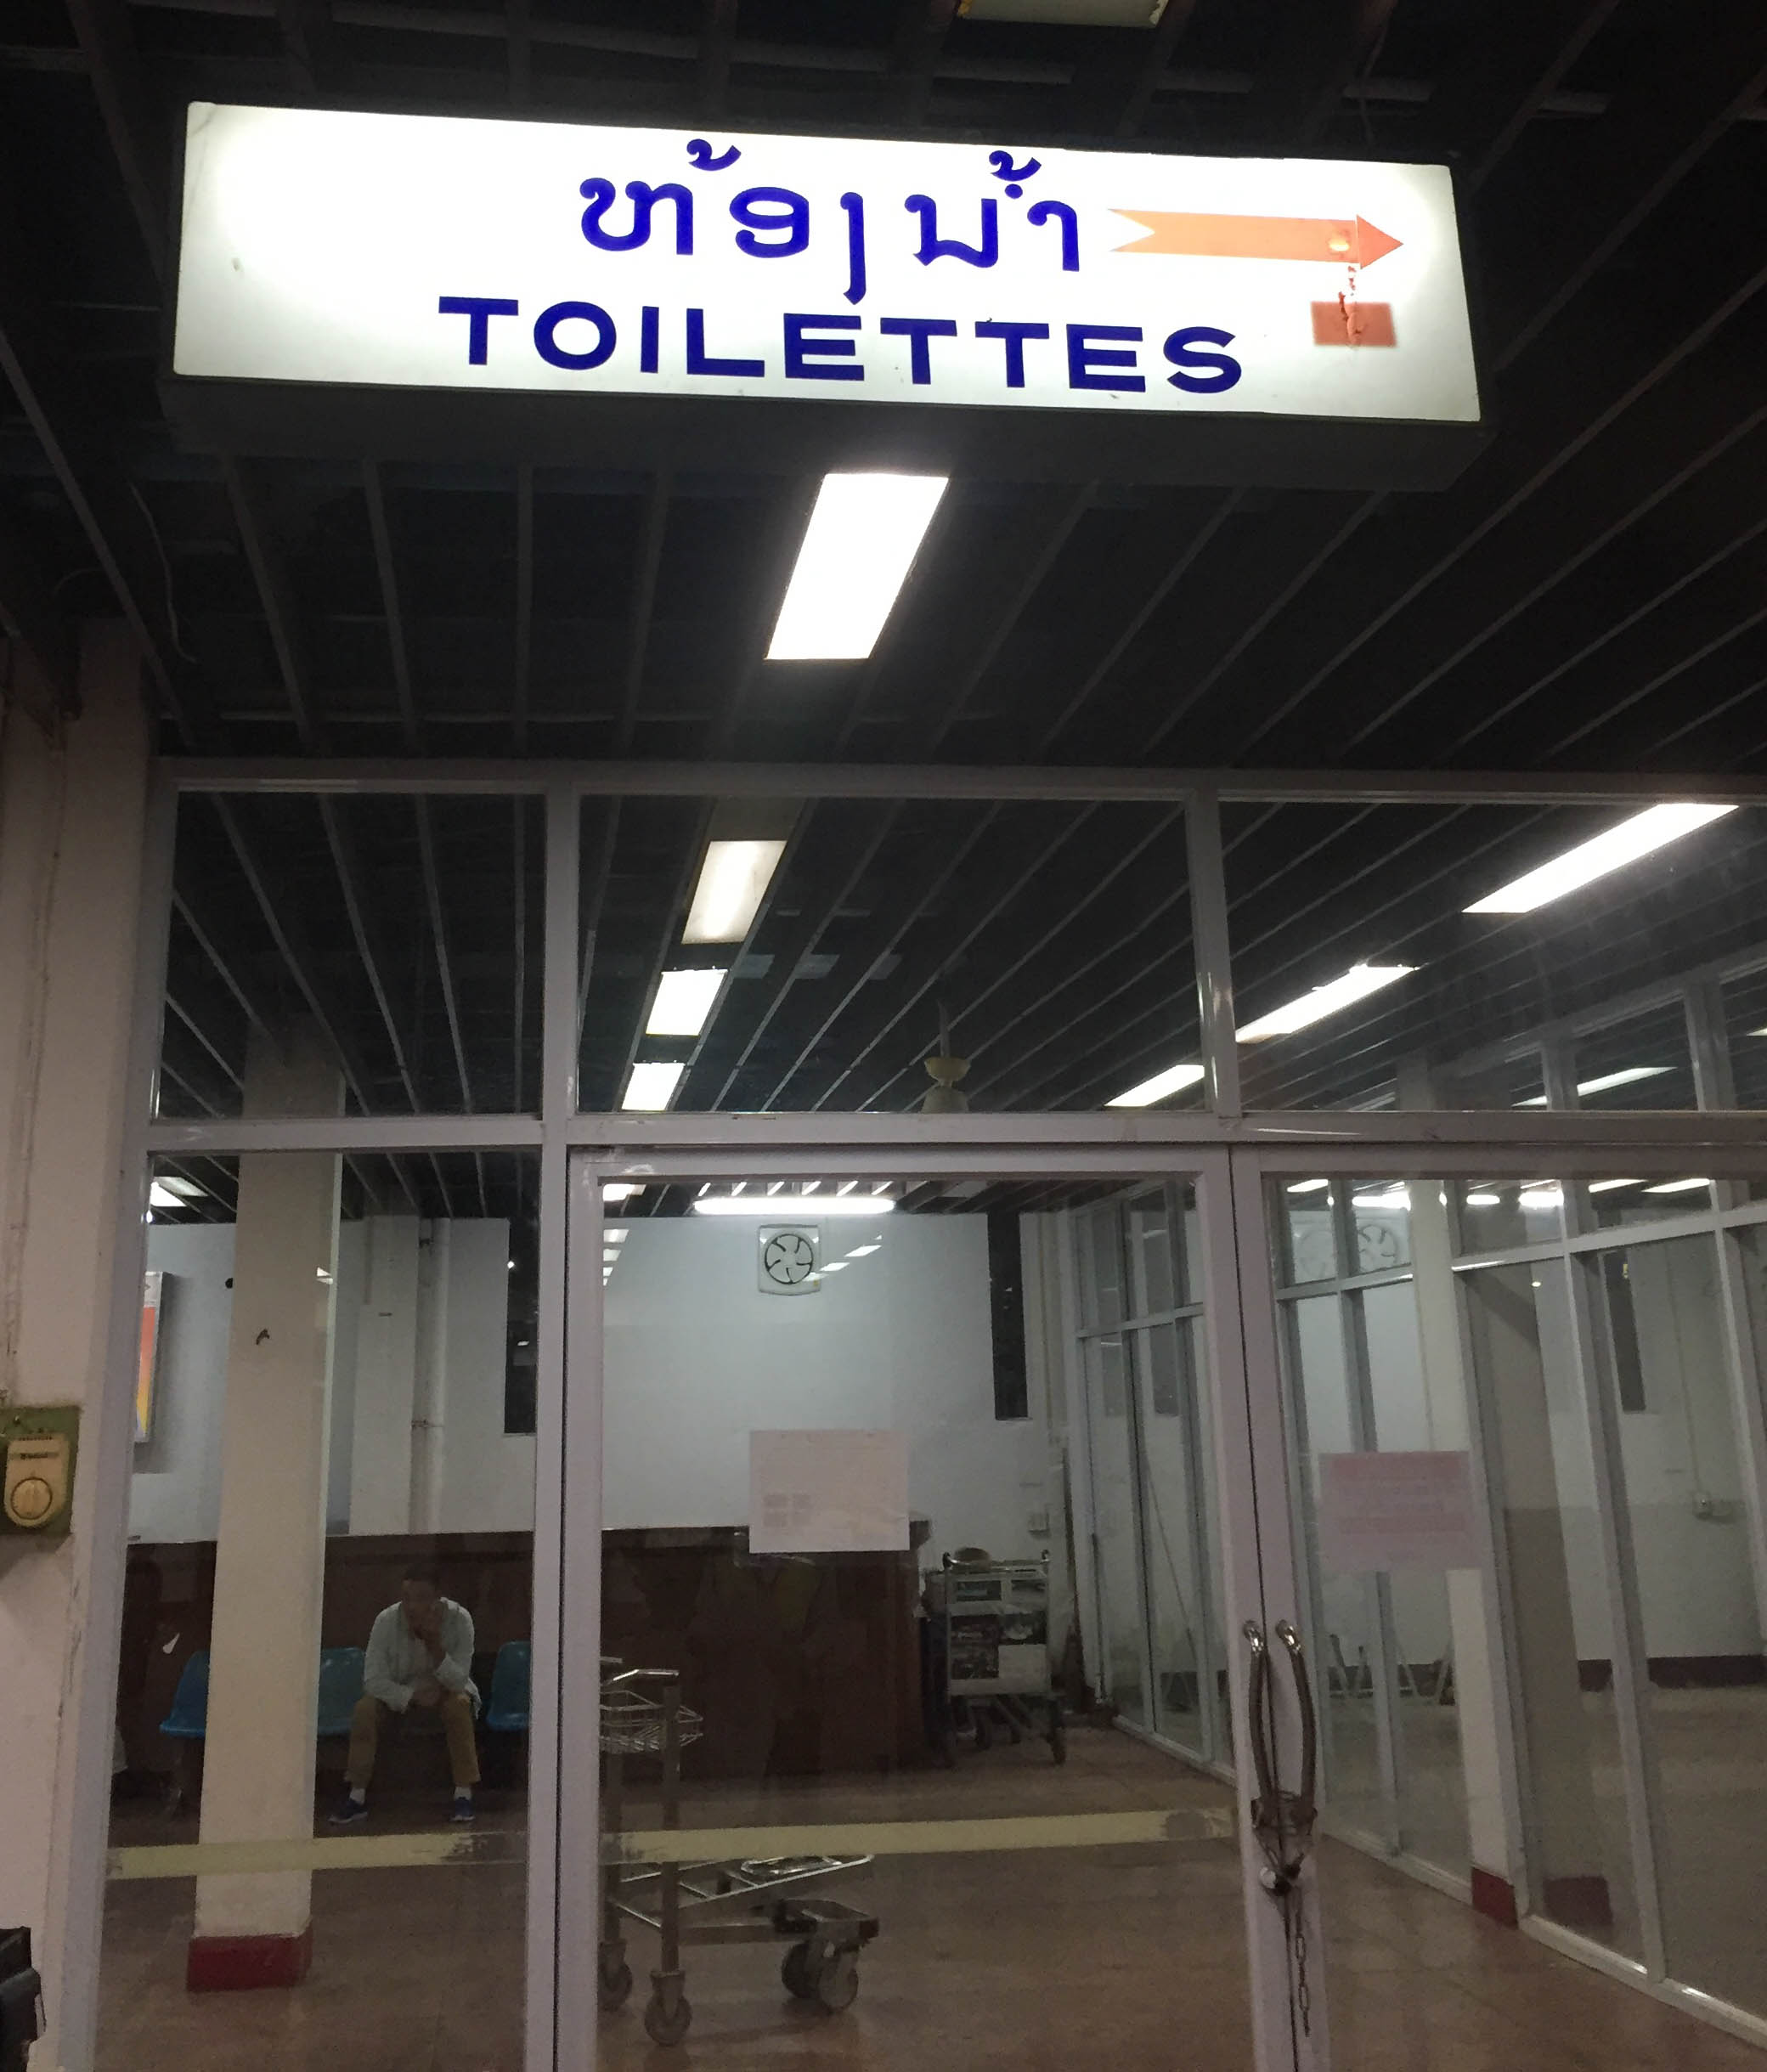 Scenes from the Vientiane Airport